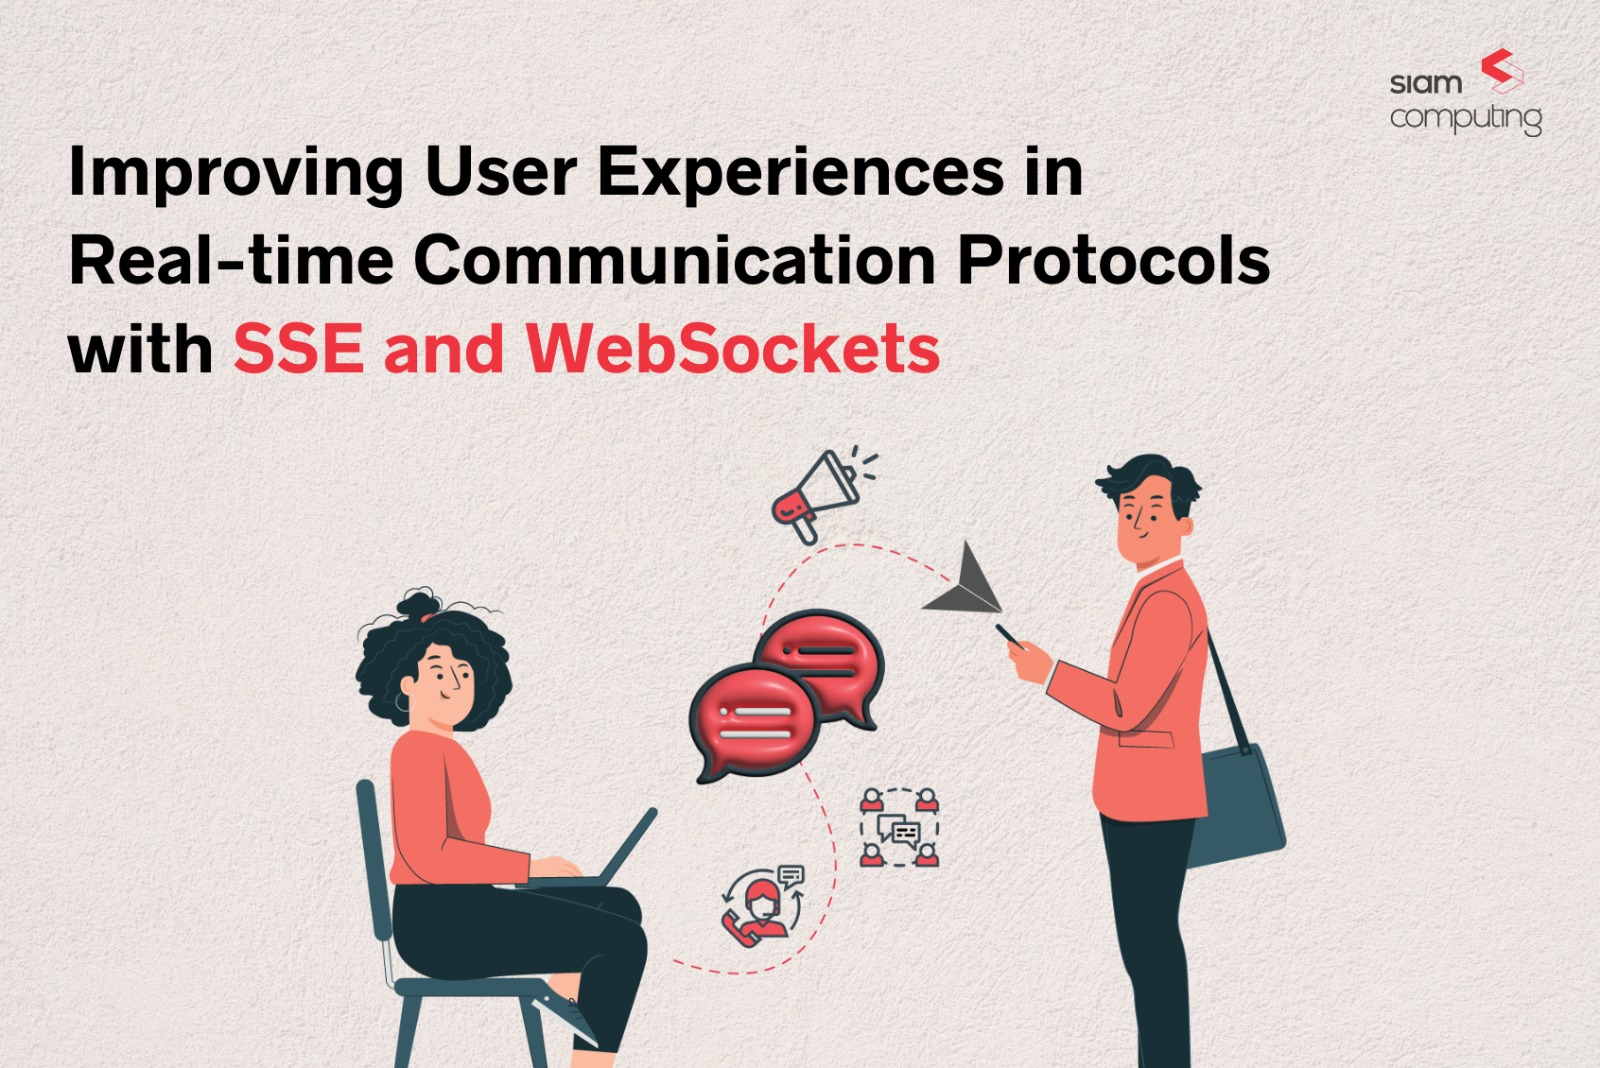 Improving User Experiences in Real-Time Communication Protocols with WebSockets and SSE